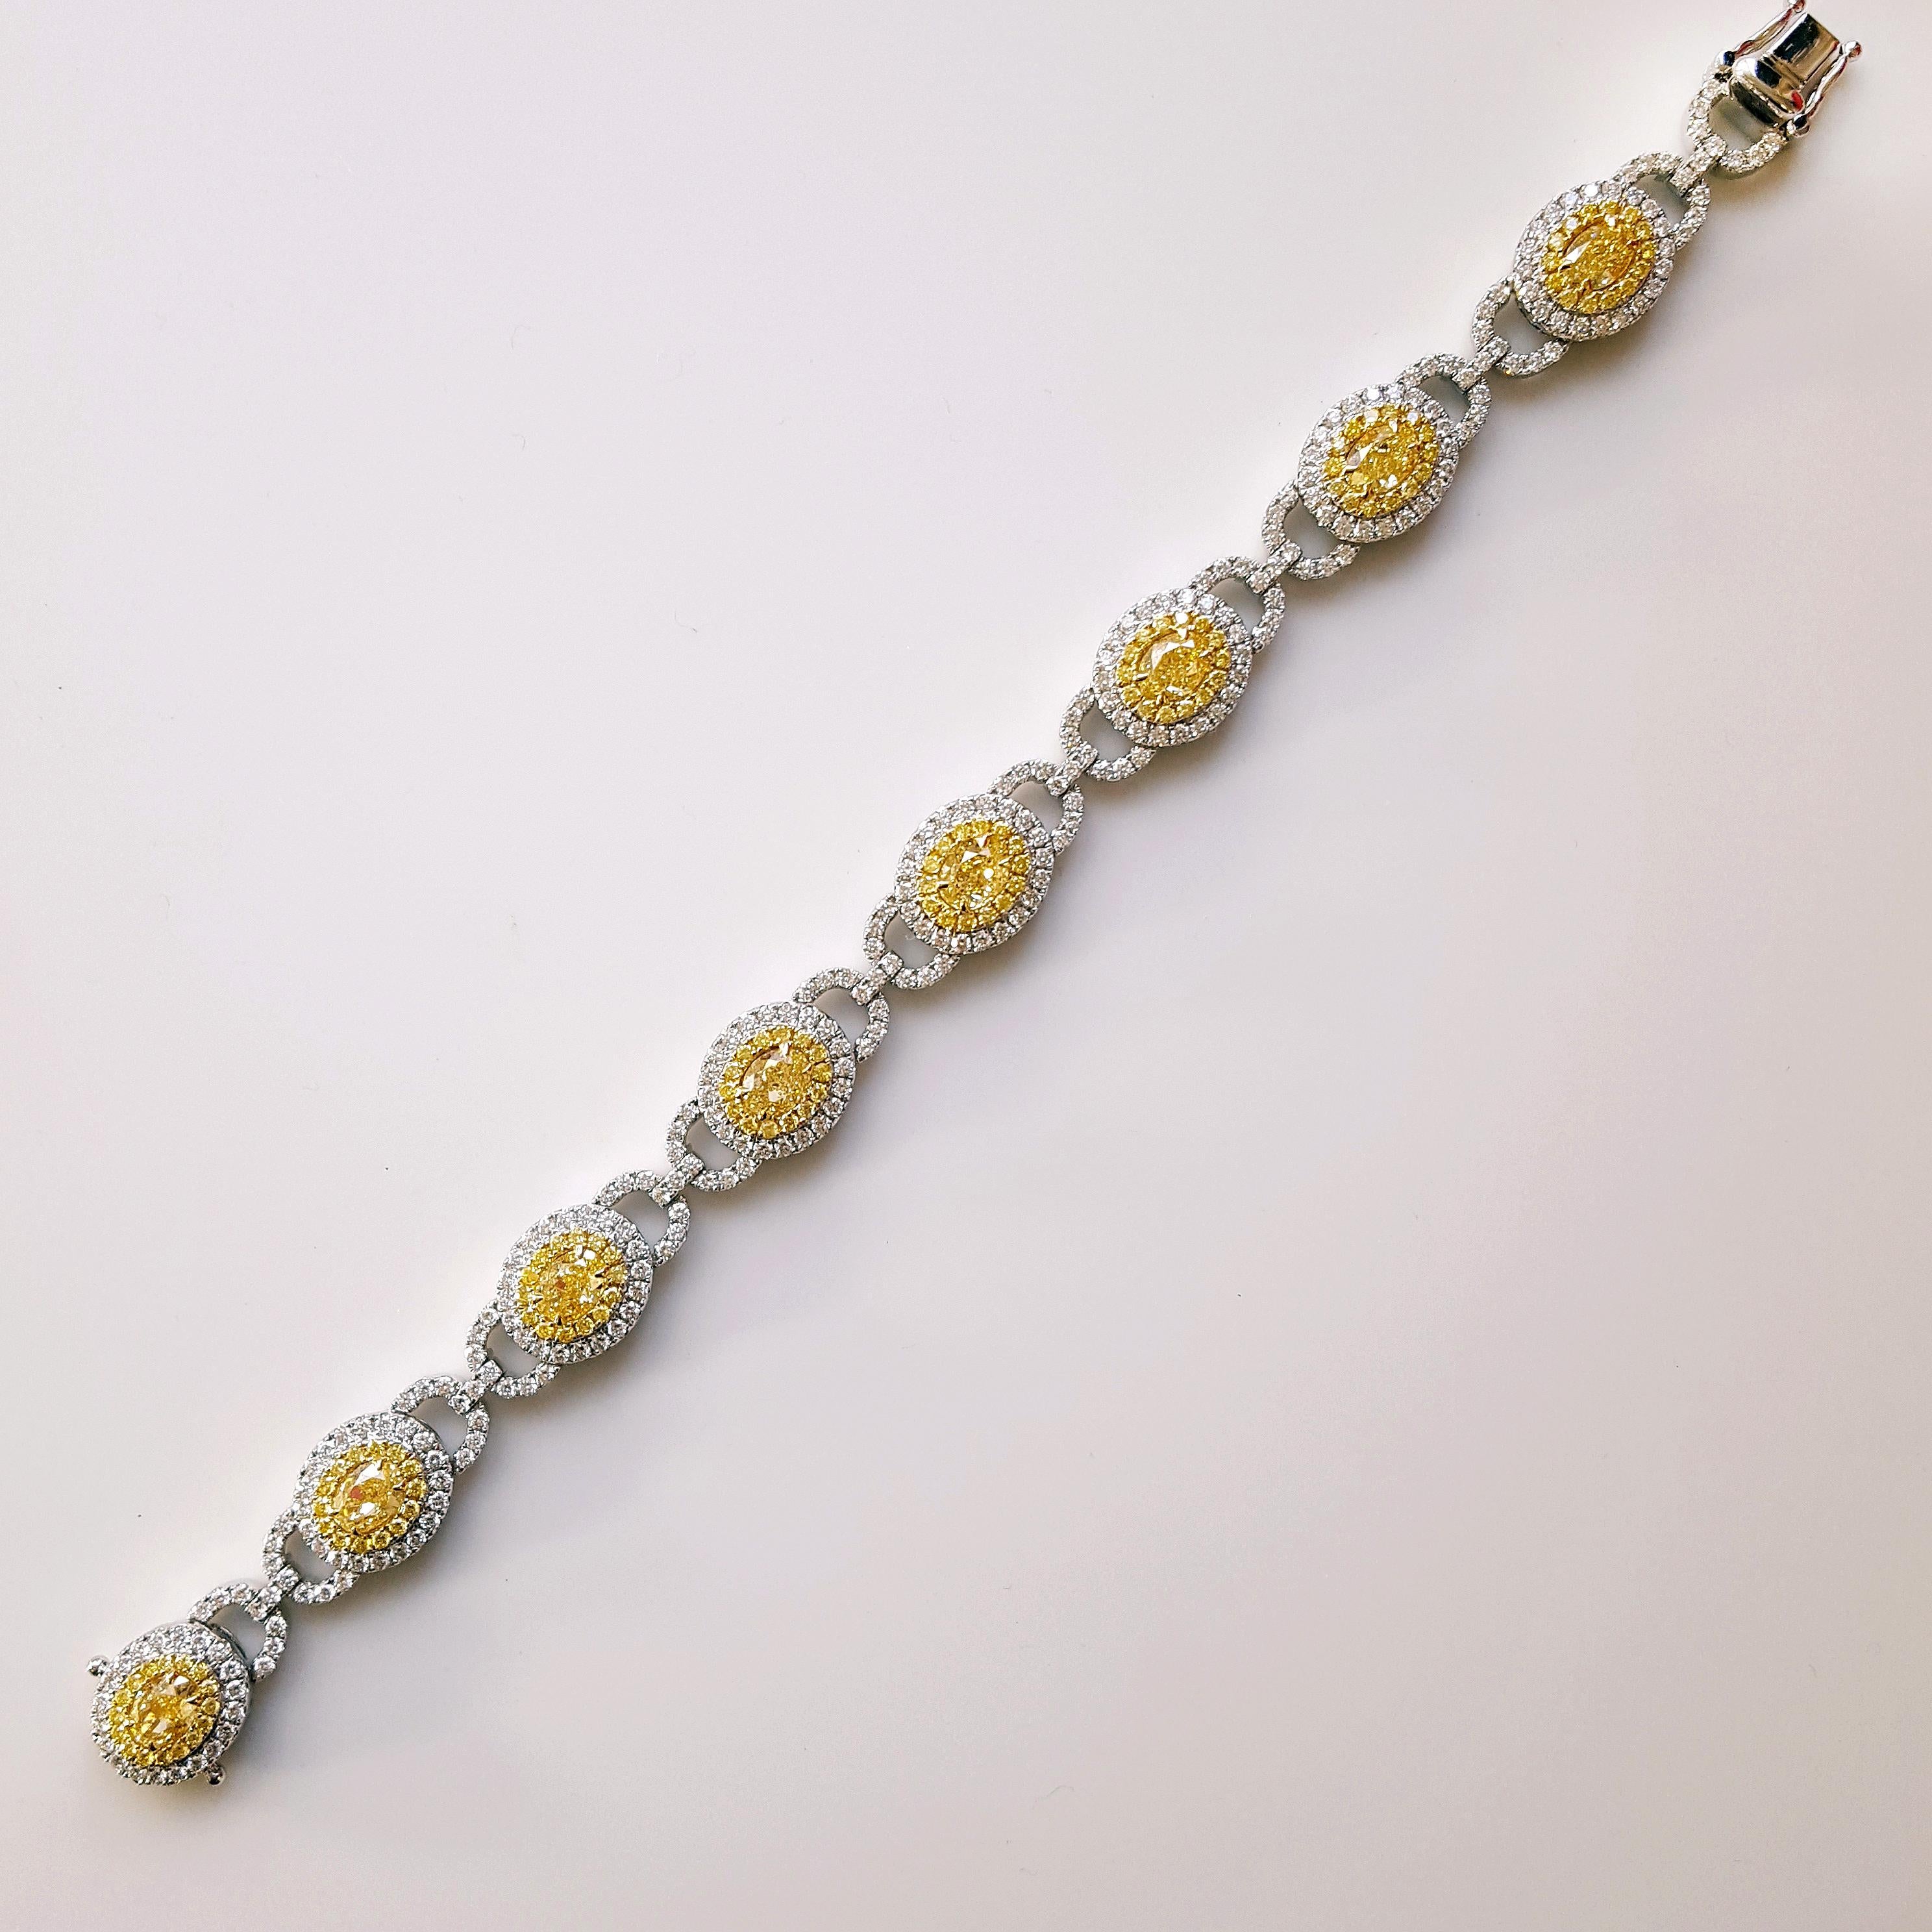 A truly remarkable statement bracelet featuring a dazzling array of of 8 Oval-Cut yellow diamonds at its heart weighing 5.59 carat total. Each of these exquisite yellow diamonds is cradled within 18K yellow gold and 18K white gold frames, adorned